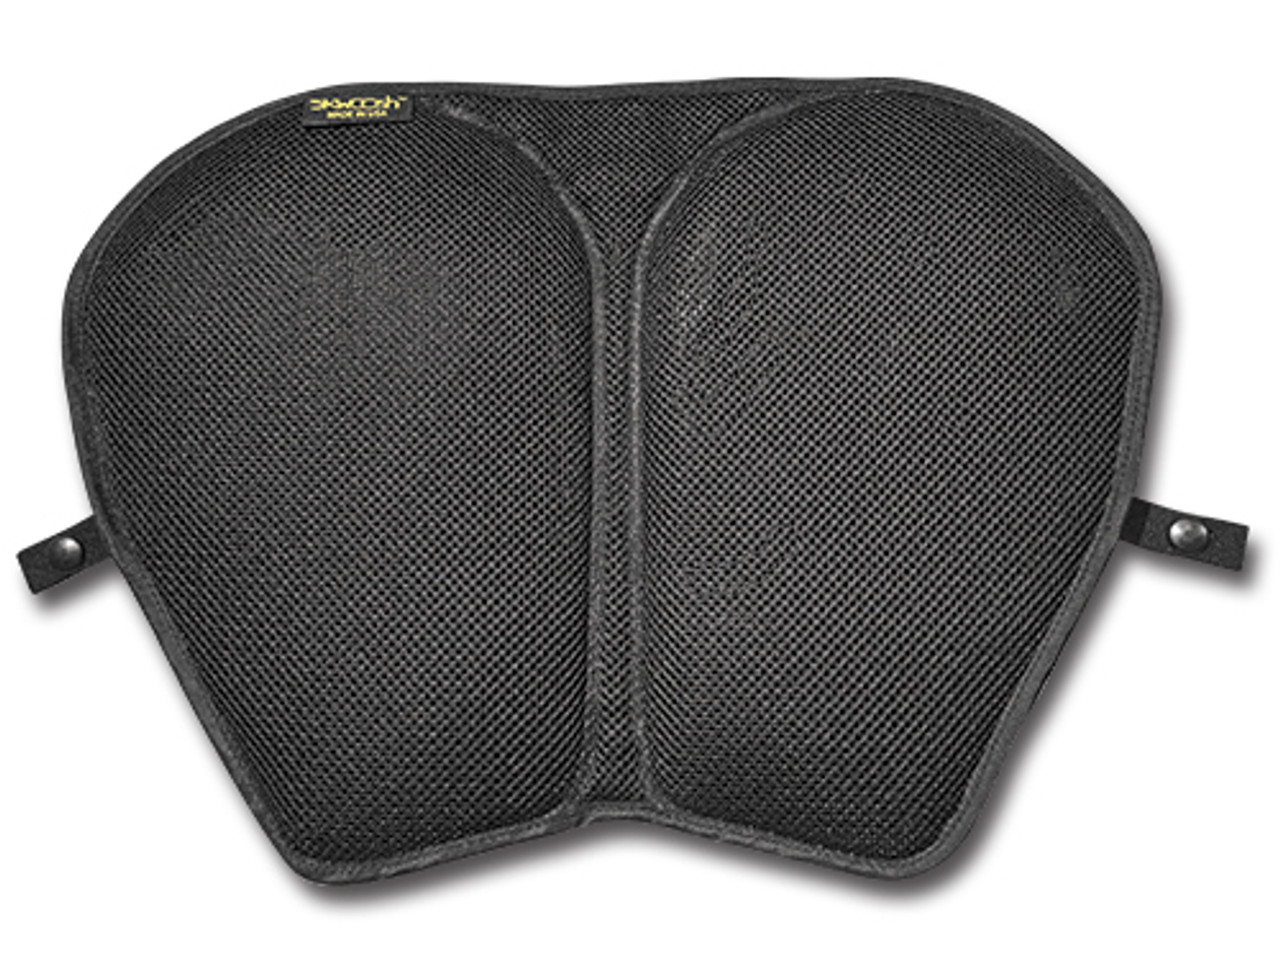 Motorcycle Gel Seat Cushion Pressure Relief Pad Large for Cruiser Touring  Saddle